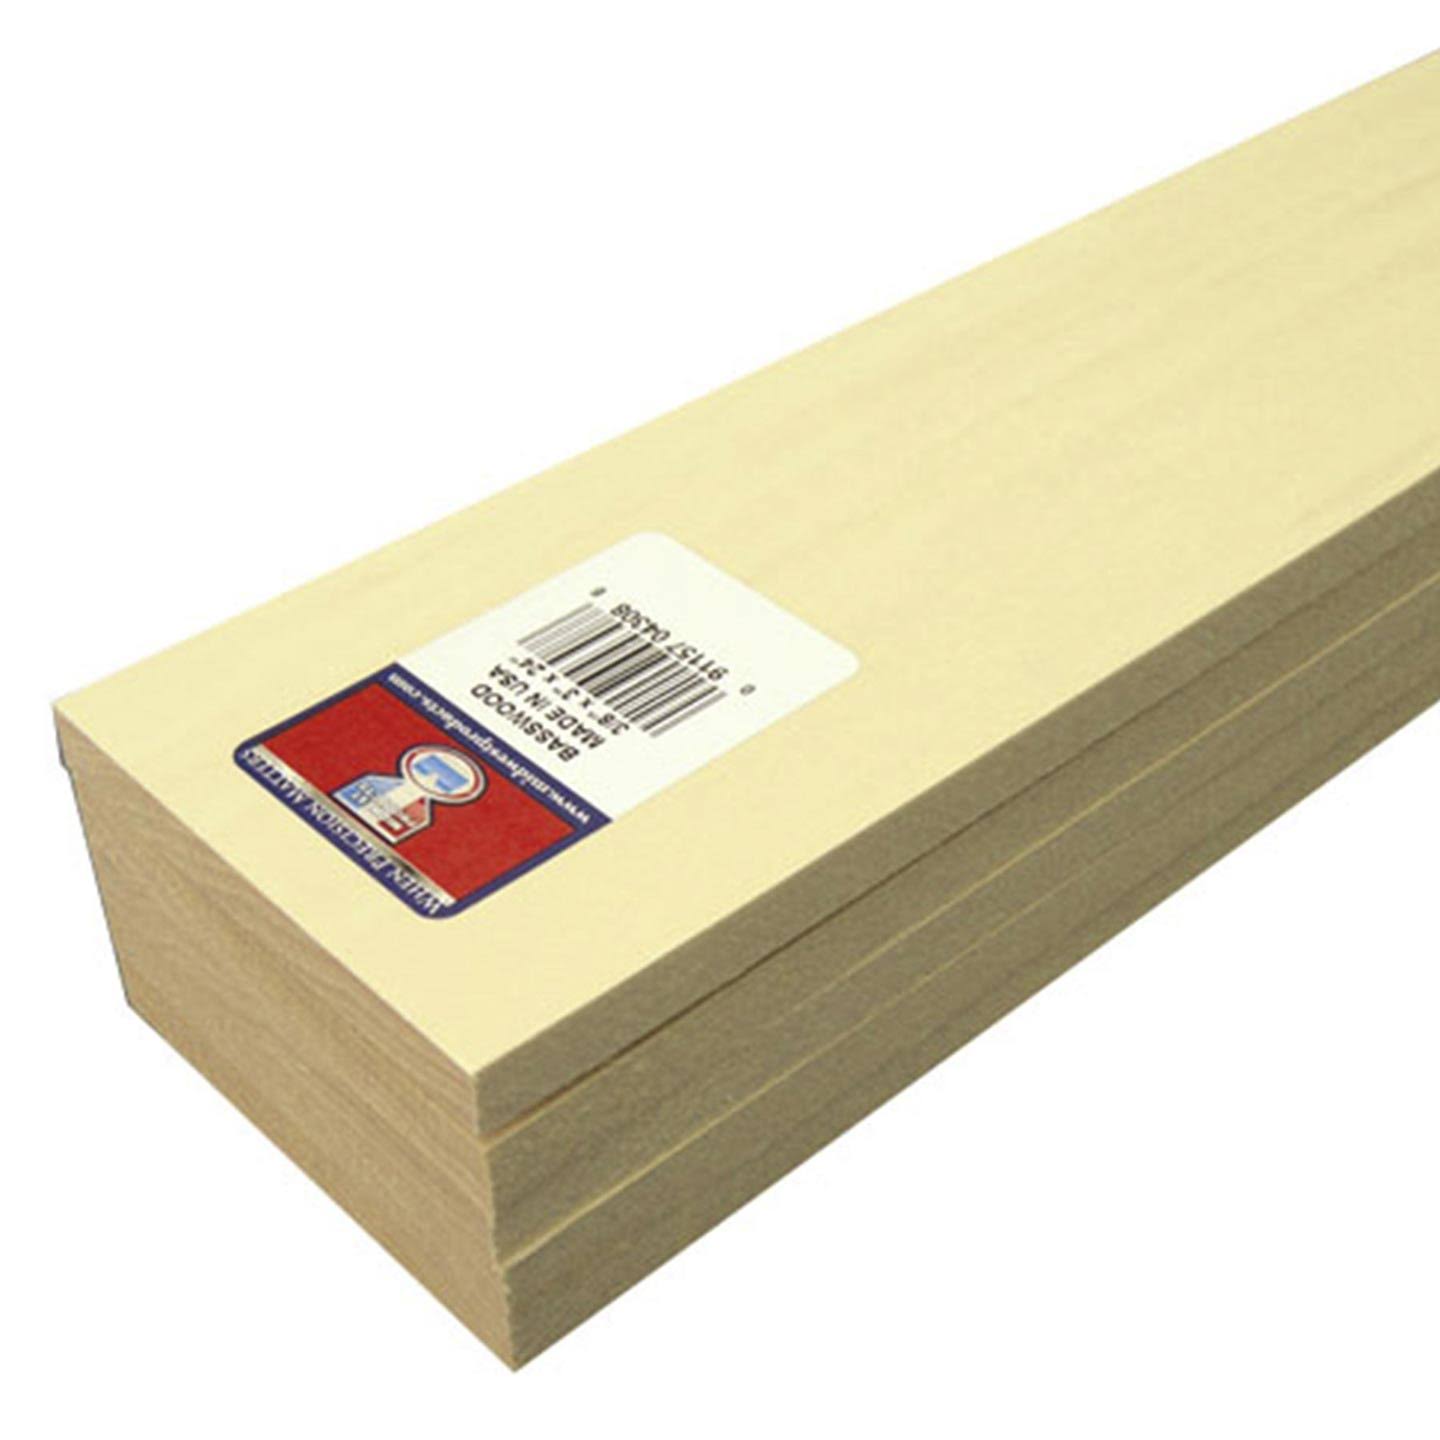 Midwest Basswood 3/8 x 3 x 24" (5)